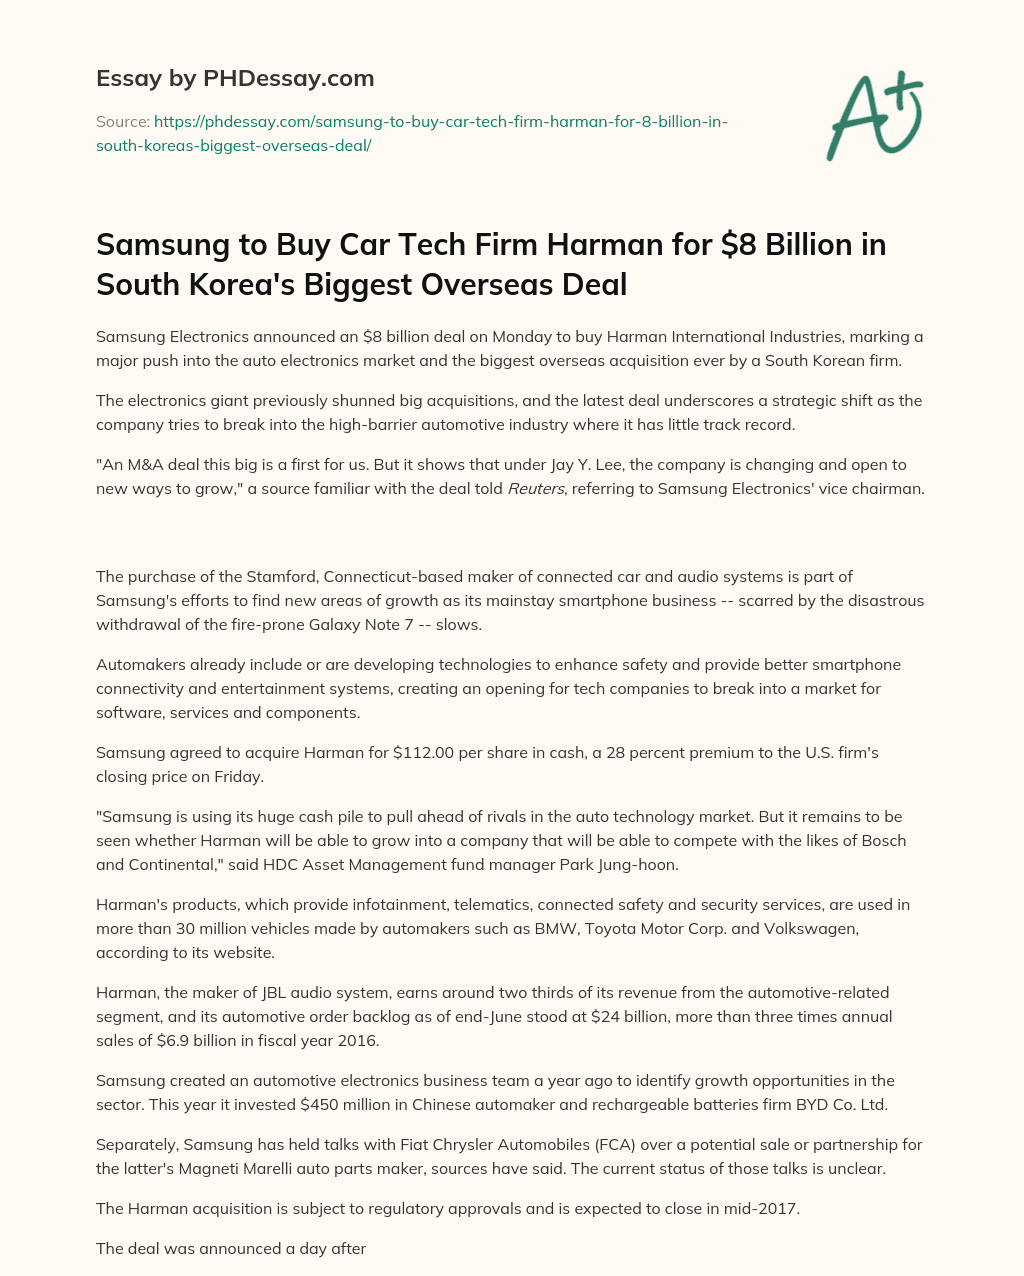 Samsung to Buy Car Tech Firm Harman for $8 Billion in South Korea’s Biggest Overseas Deal essay